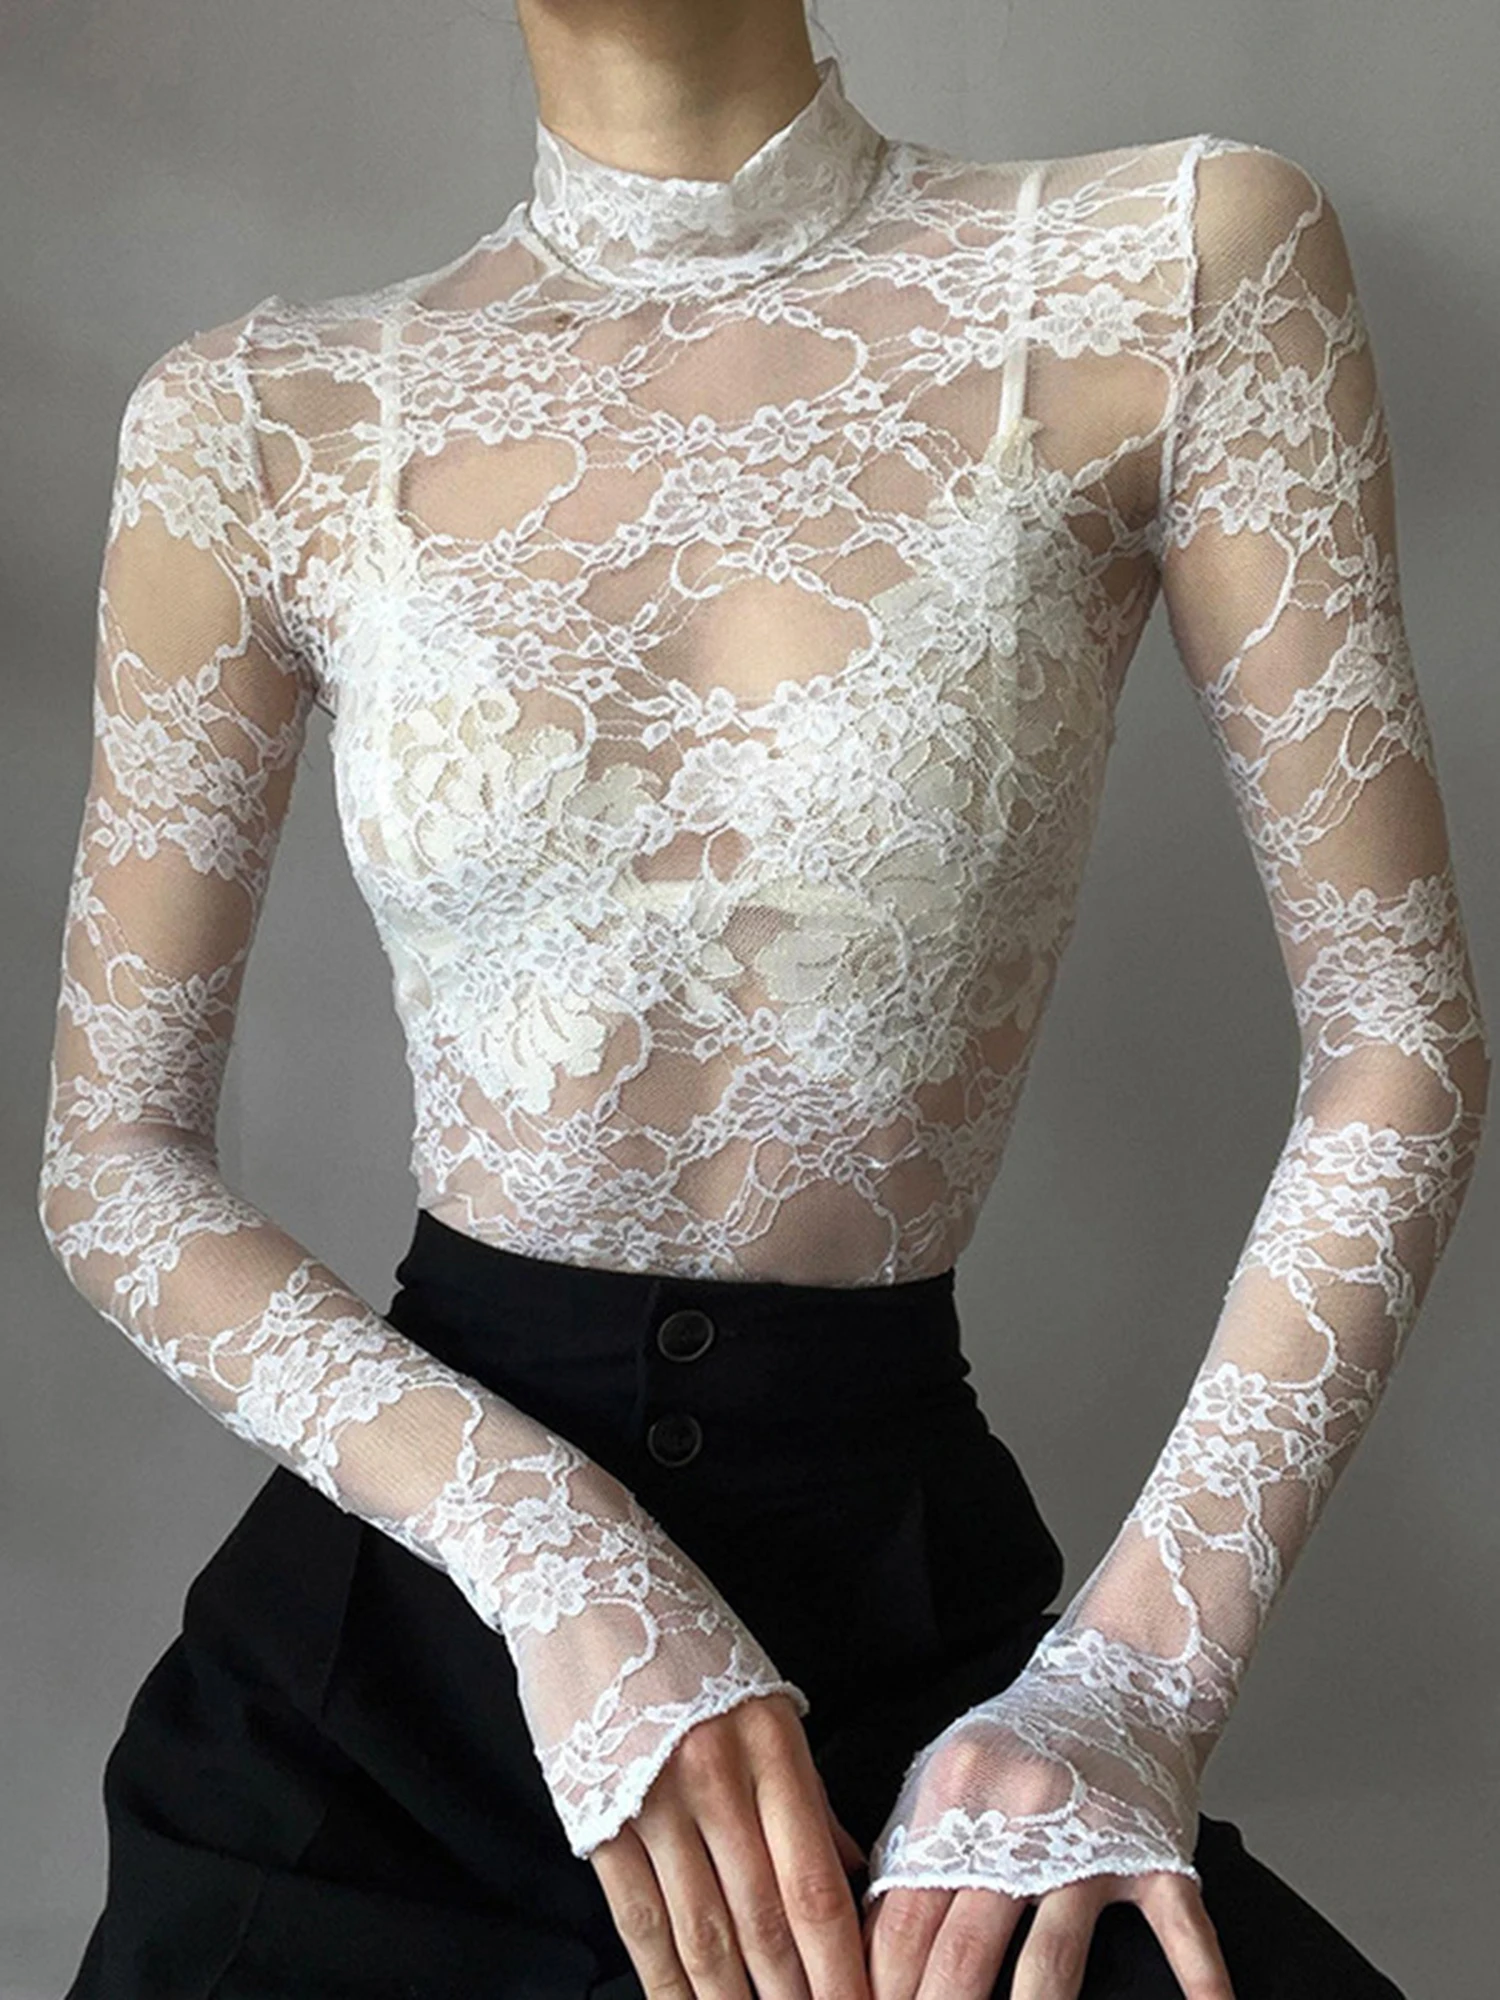 Women Lace Floral Slim T-Shirt White Long Sleeve Mock Neck Crop Tops White See Through Shirt Tops Fairy Grunge 2000s Streetwear